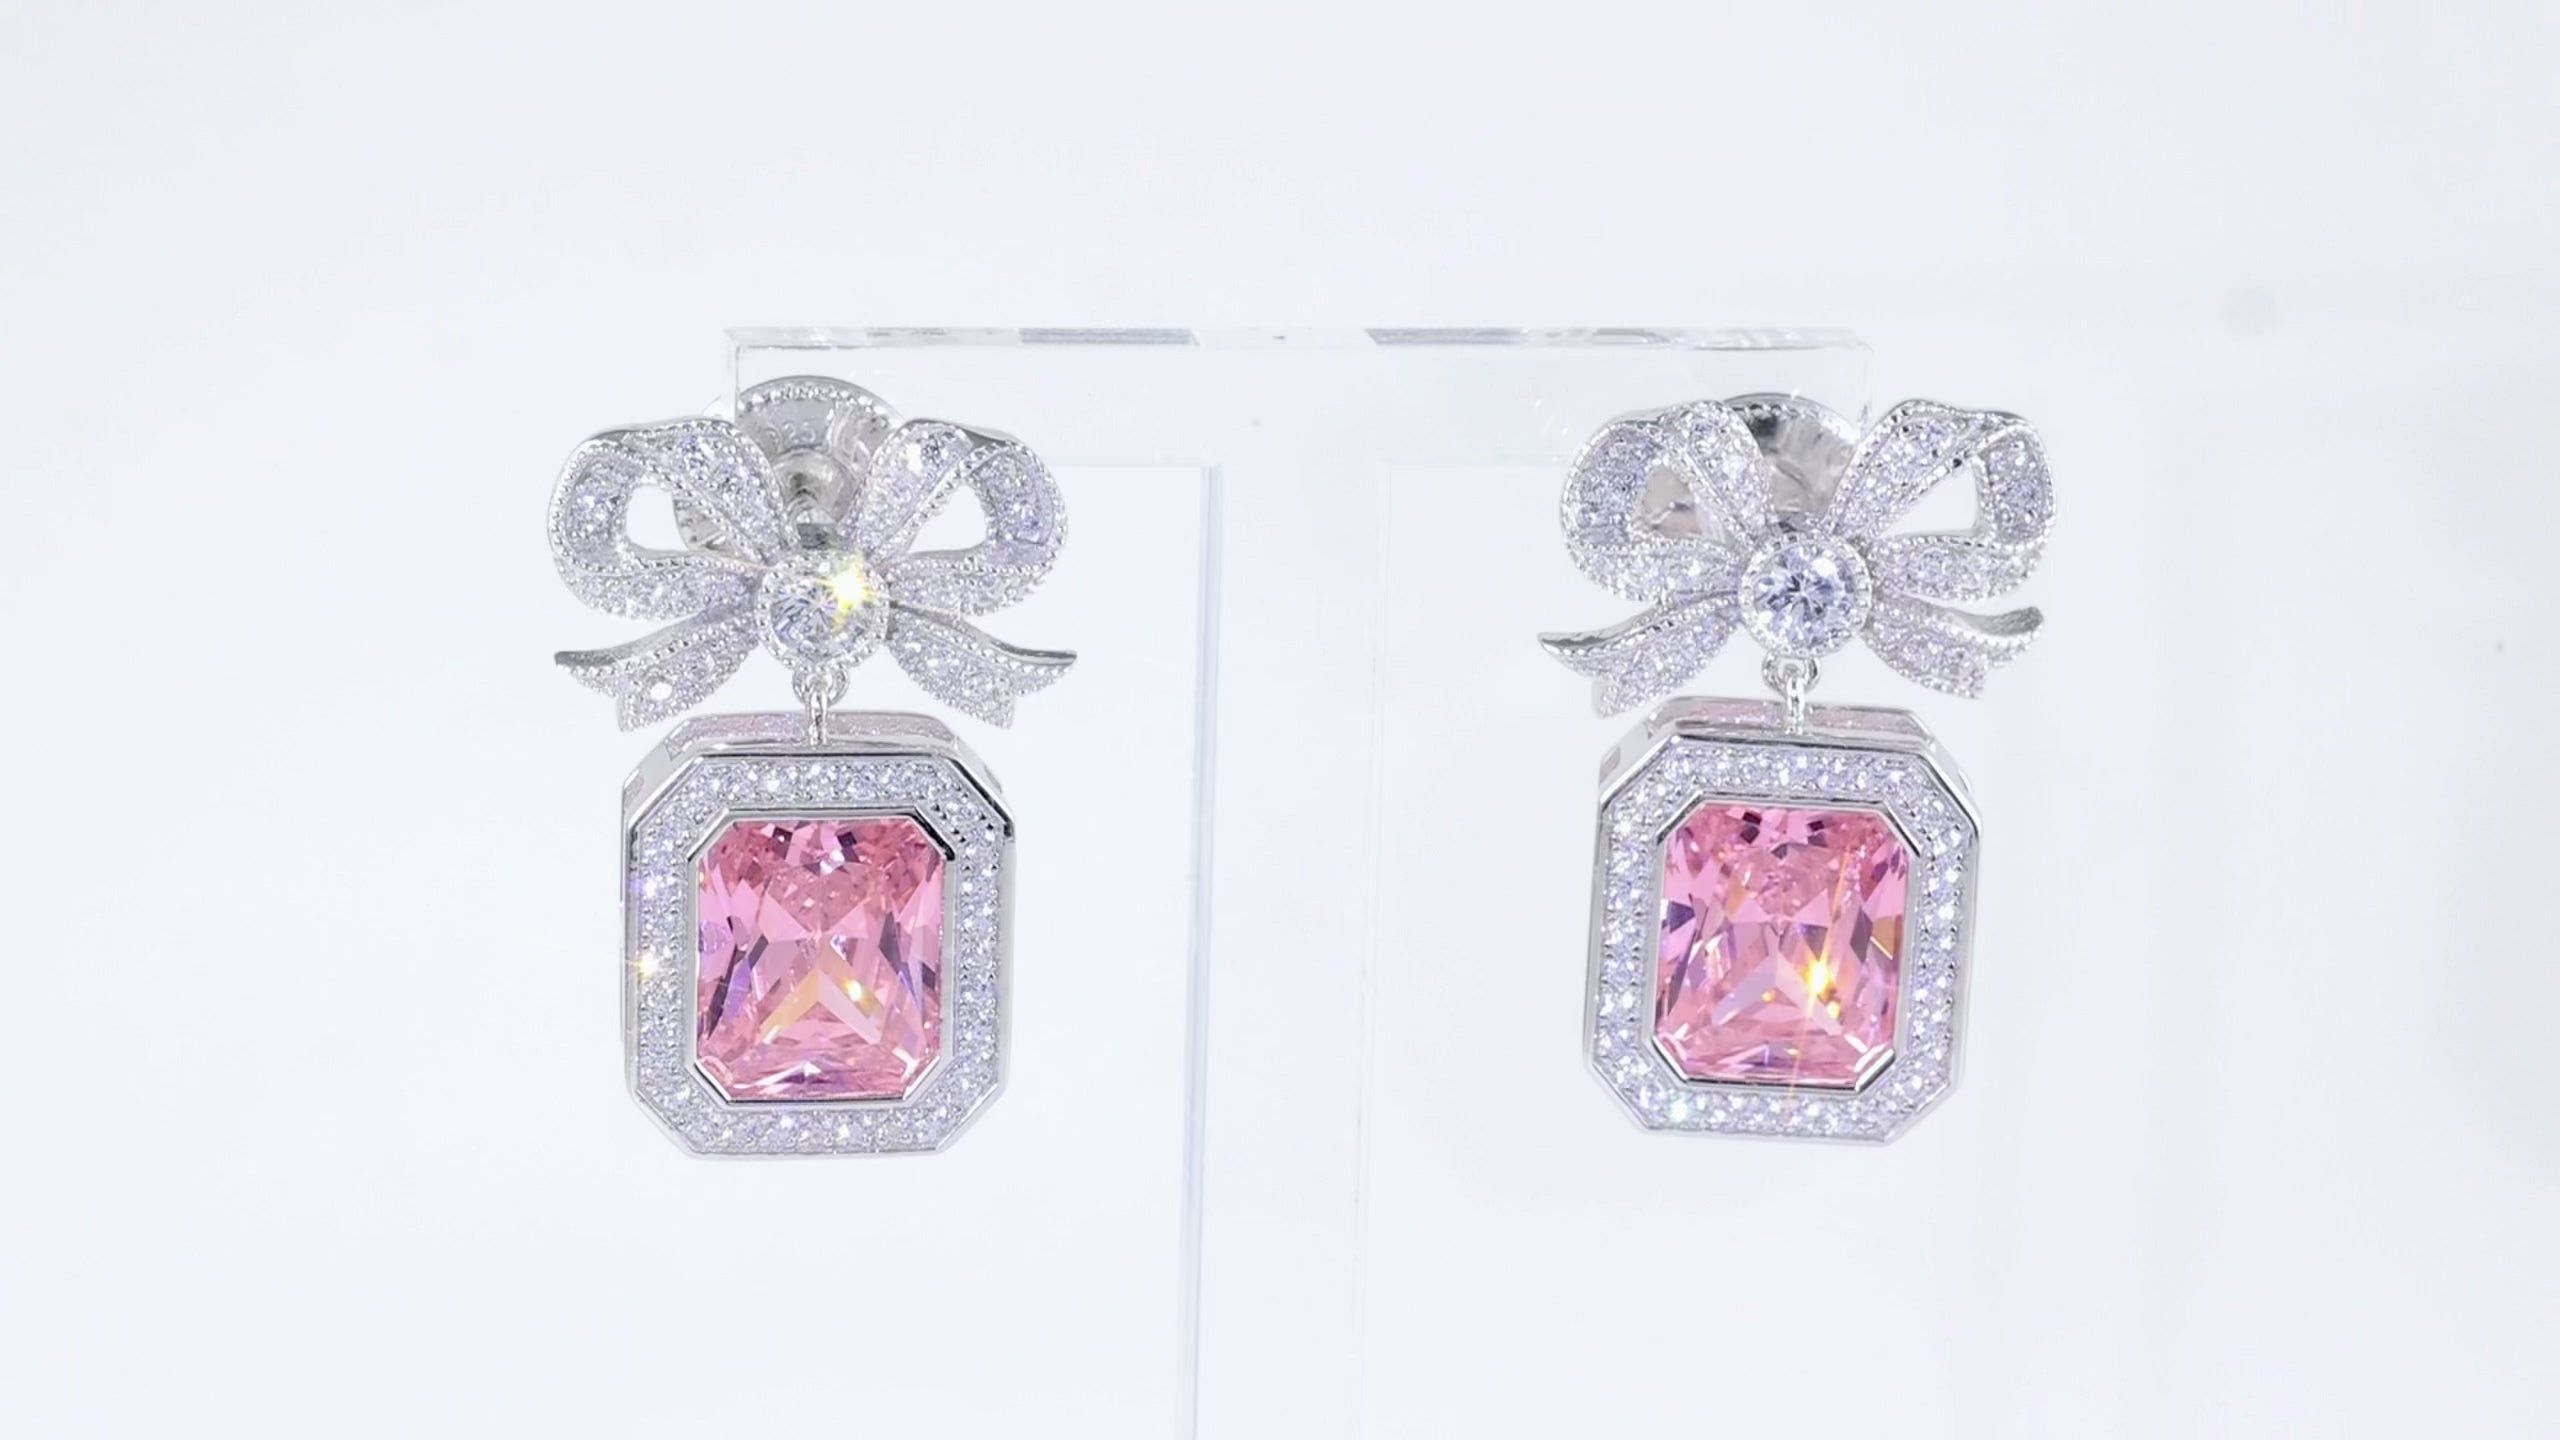 'Empress' Bow and Pink Radian Cut Crystal Silver Earrings